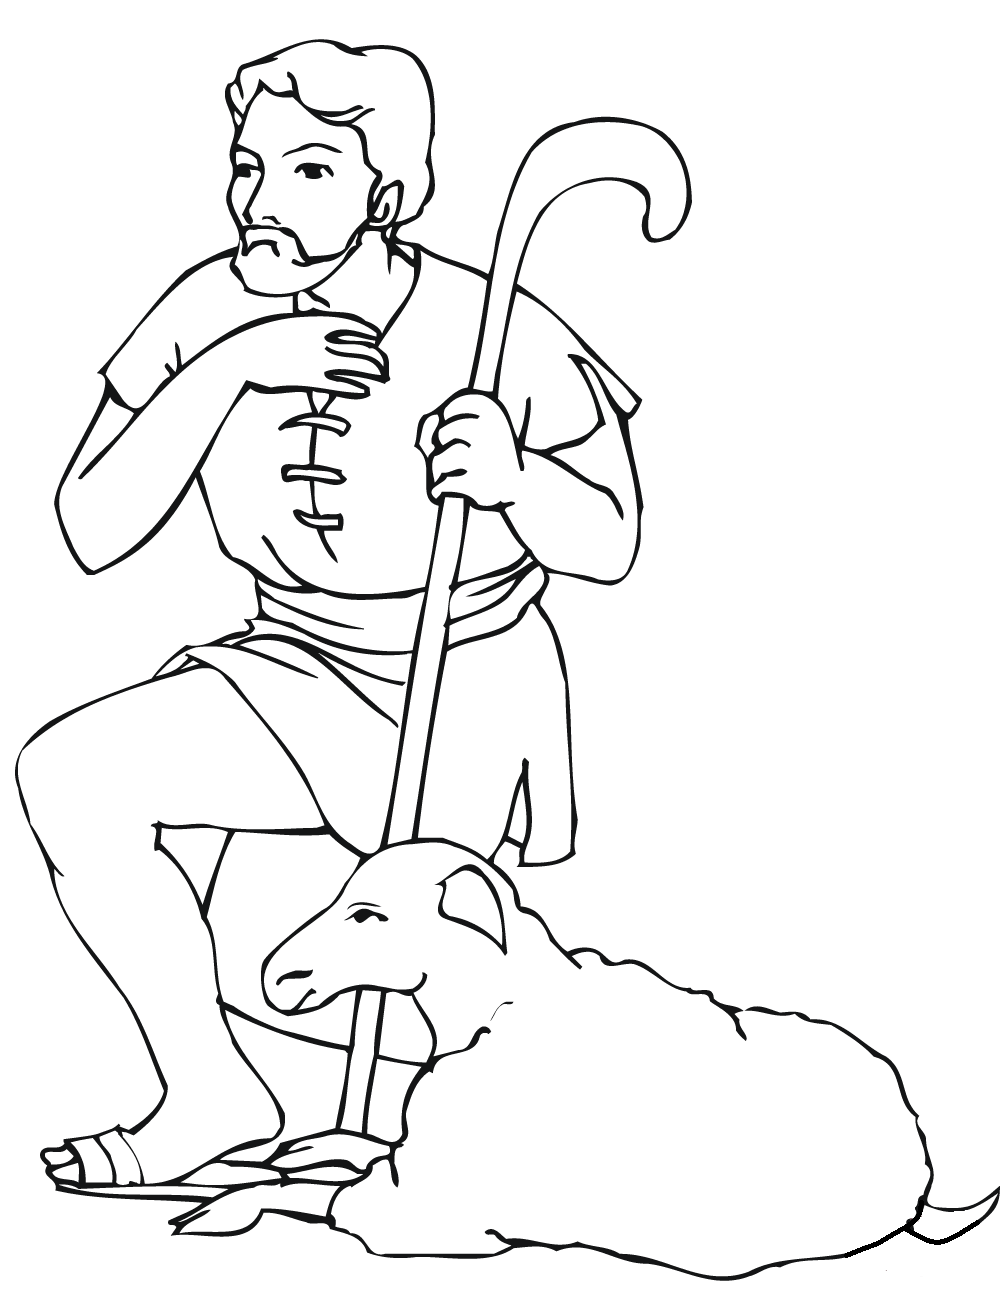 Nativity Shepard Coloring Page - Free Printable Coloring Pages For Kids